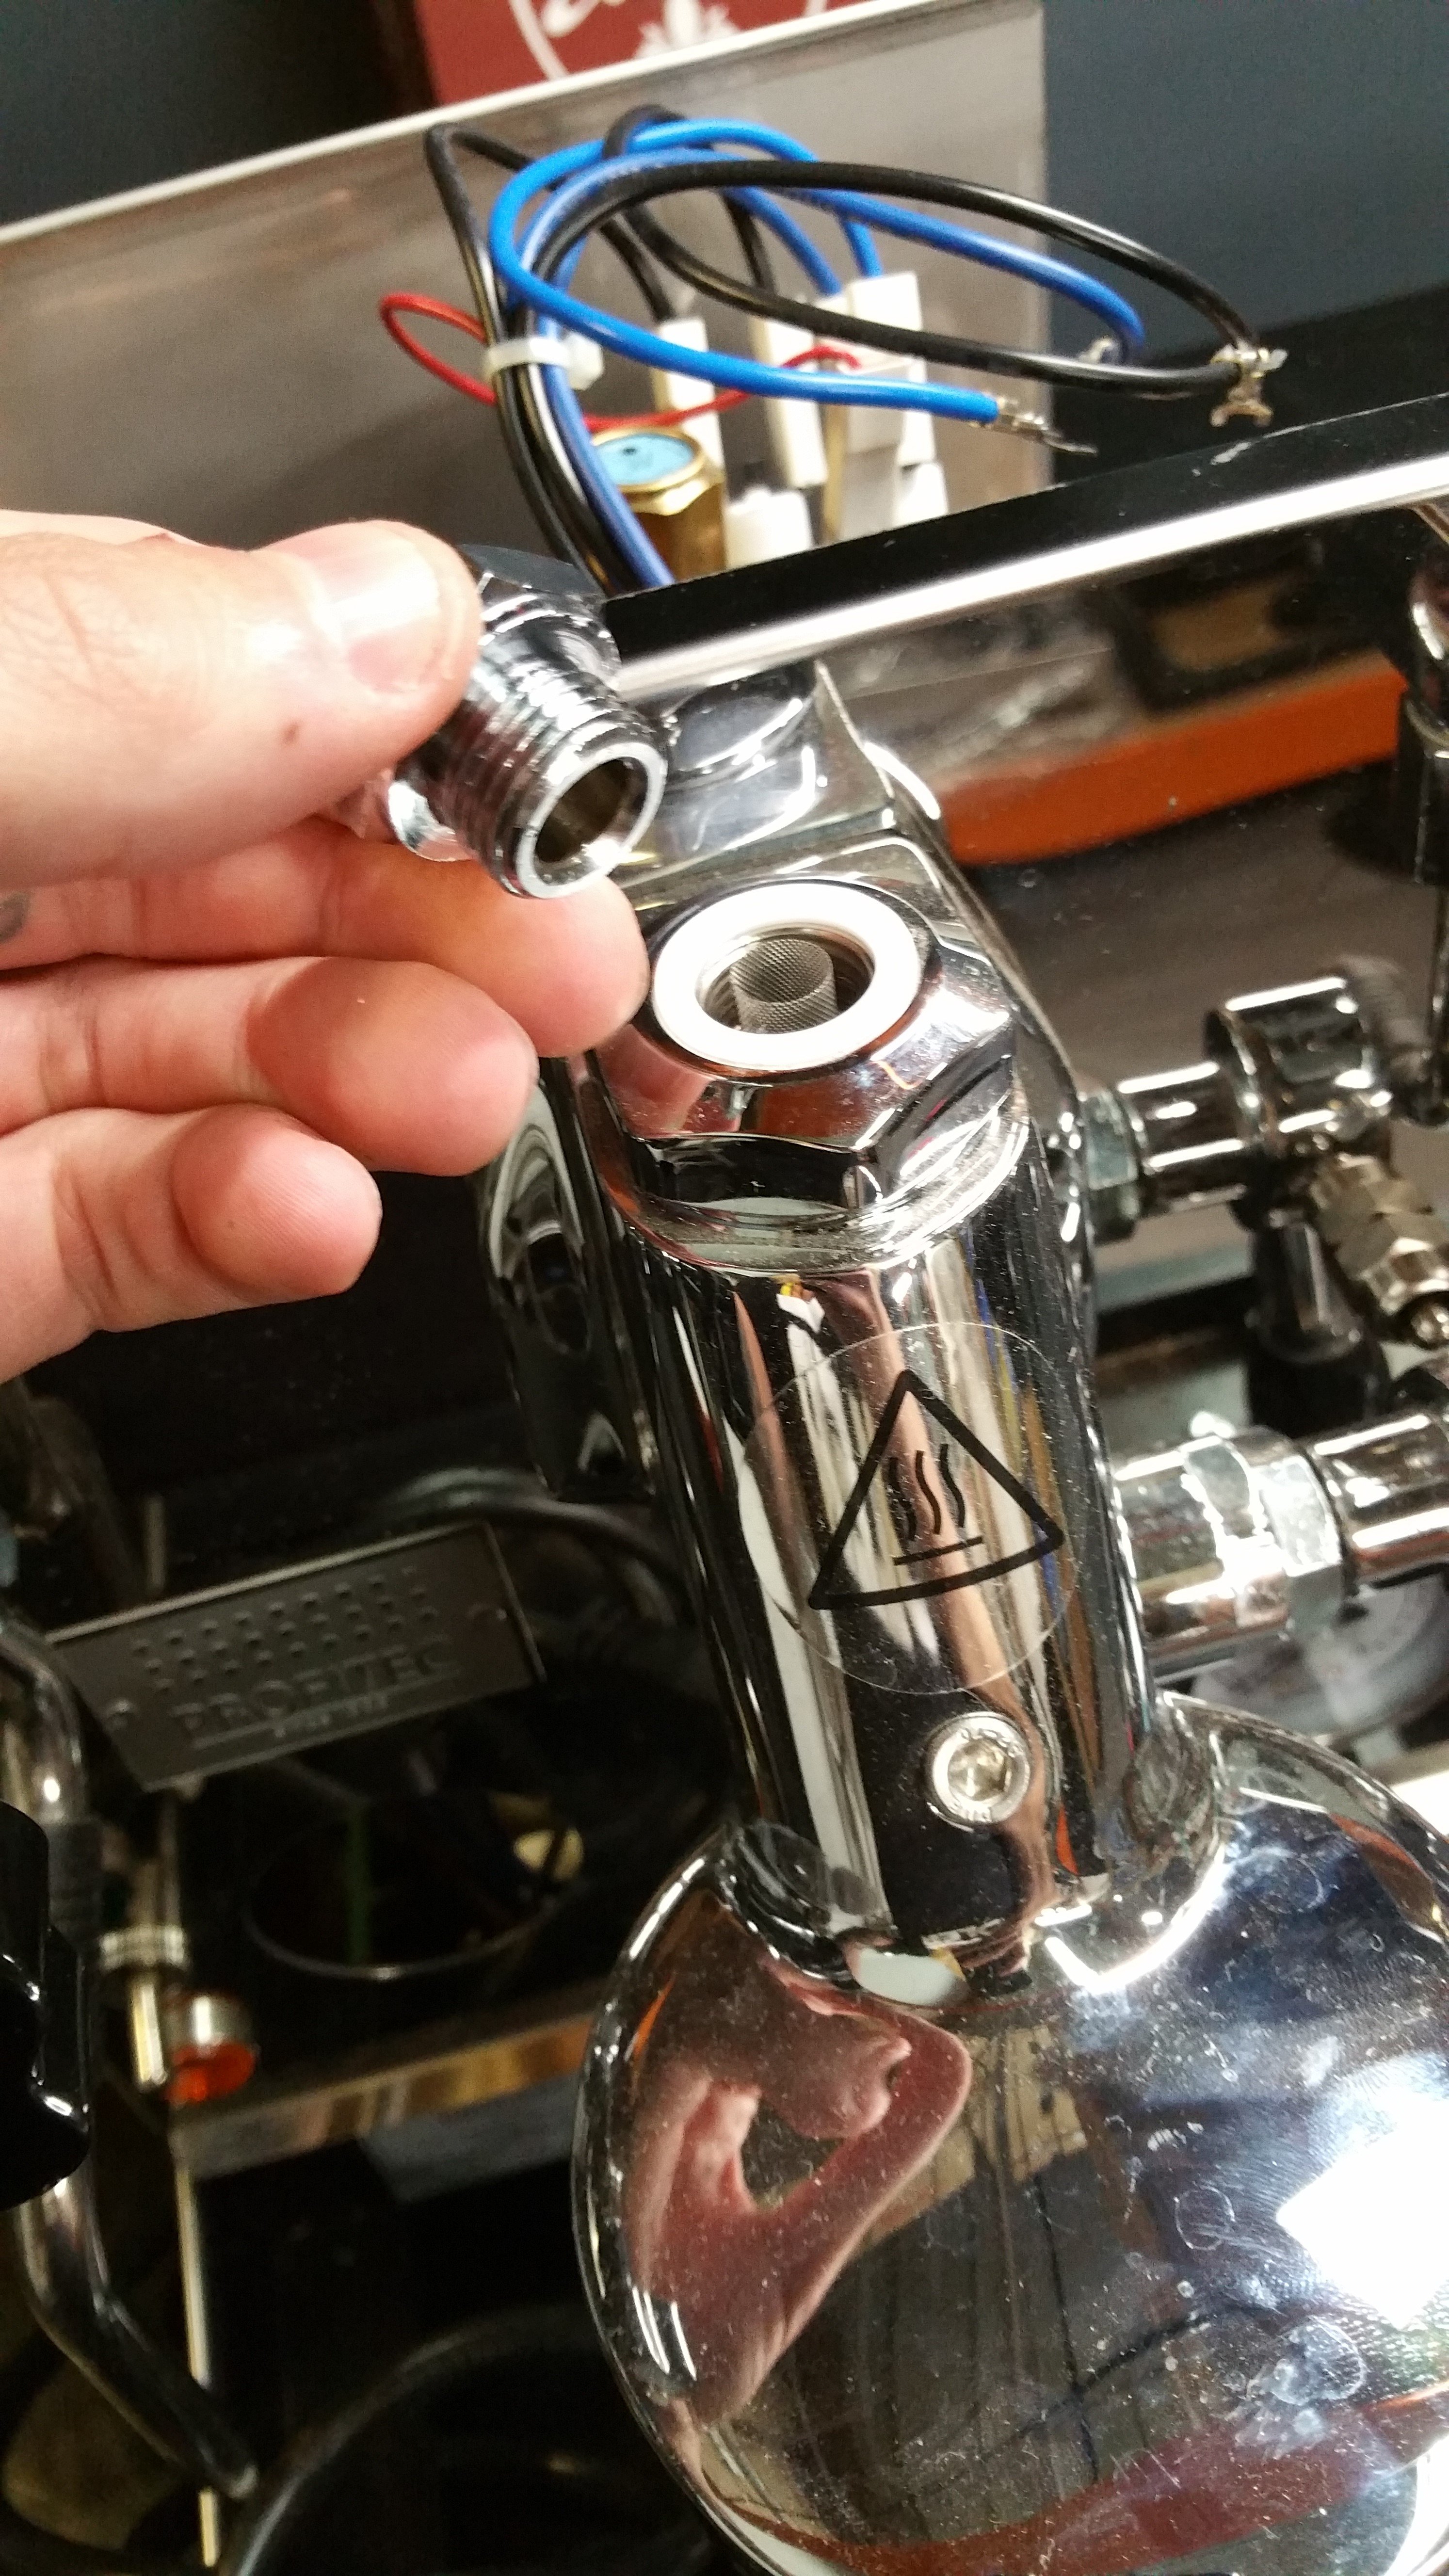 Profitec Pro 500: Water Not Coming Out of Grouphead